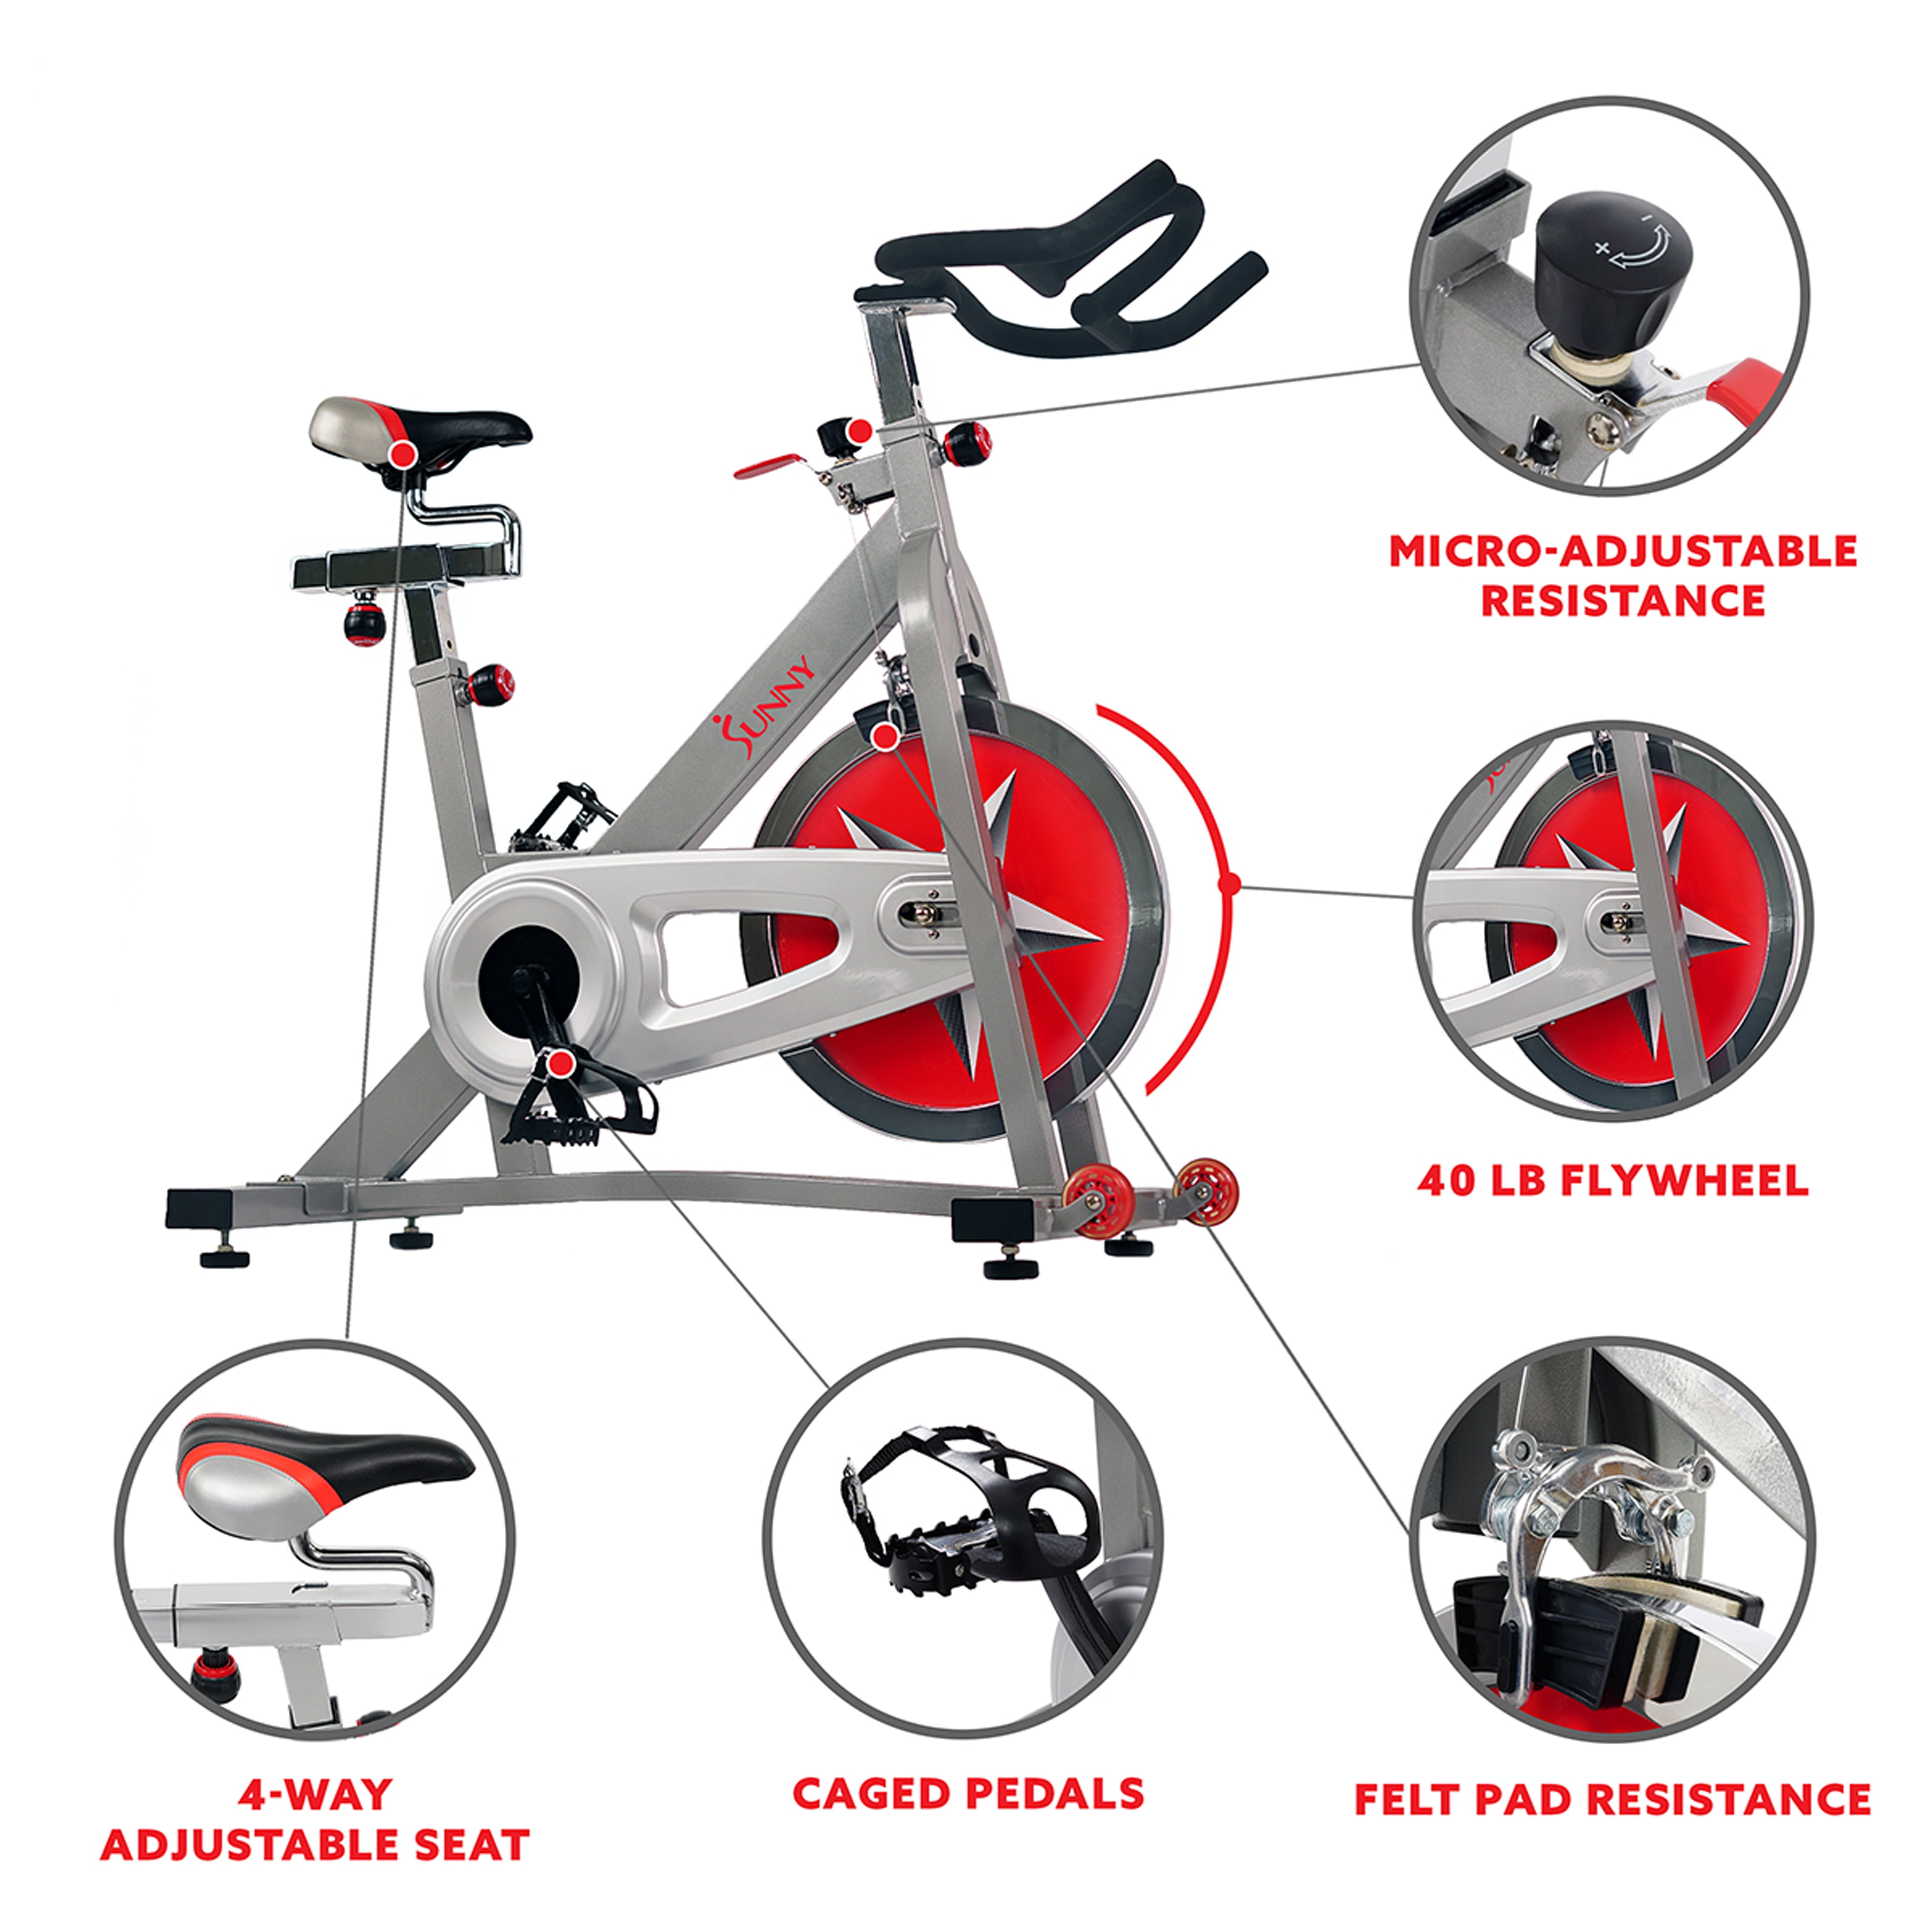 Sunny Health & Fitness Stationary Chain Drive 40 lb Flywheel Pro Indoor Cycling Exercise Bike Trainer, Workout Machine, SF-B901 - image 4 of 9